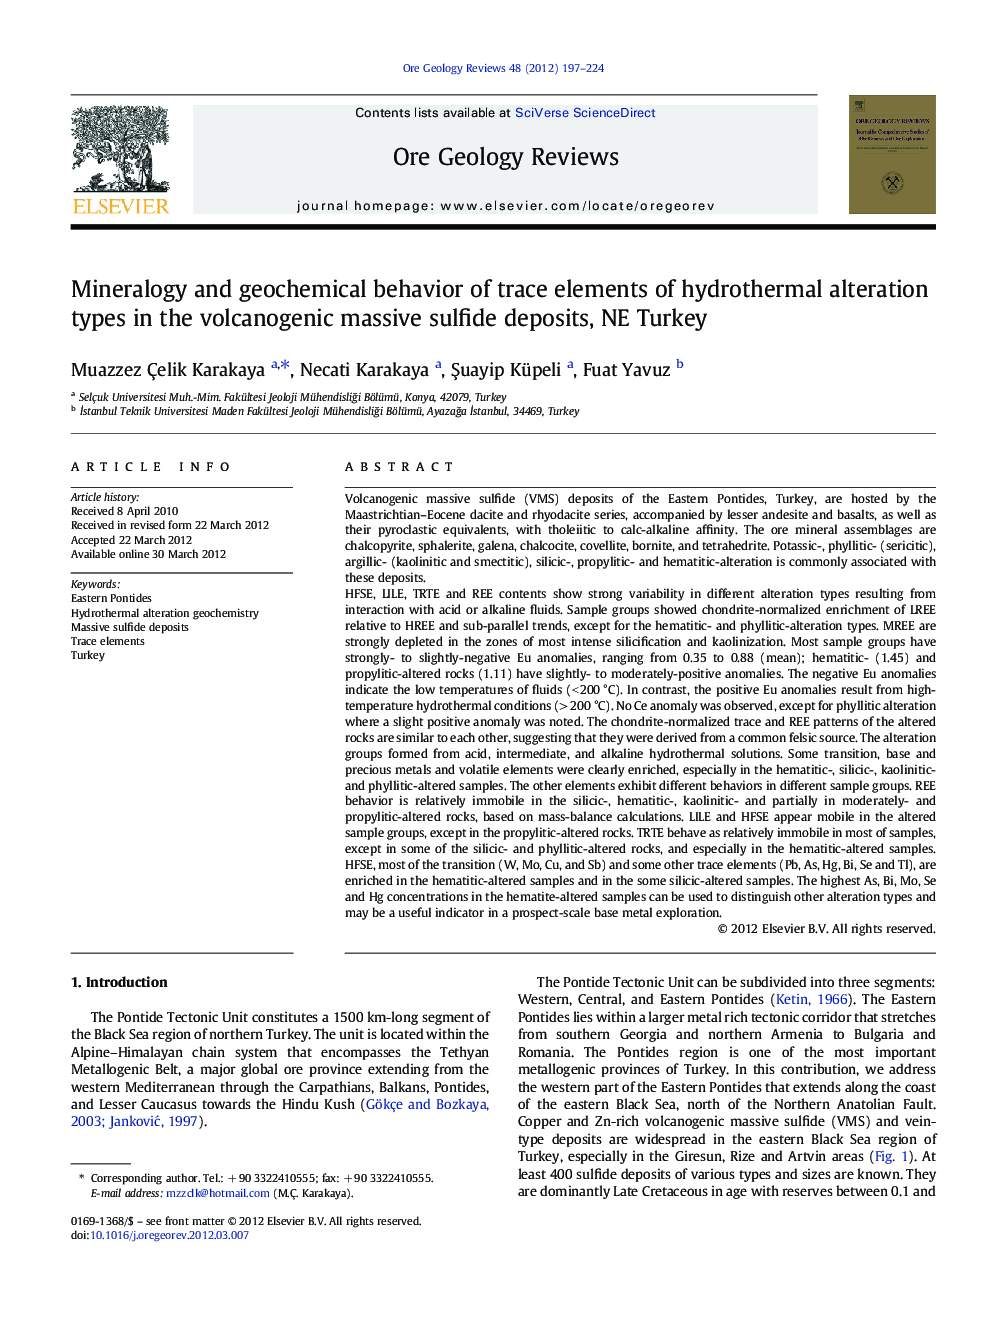 Mineralogy and geochemical behavior of trace elements of hydrothermal alteration types in the volcanogenic massive sulfide deposits, NE Turkey